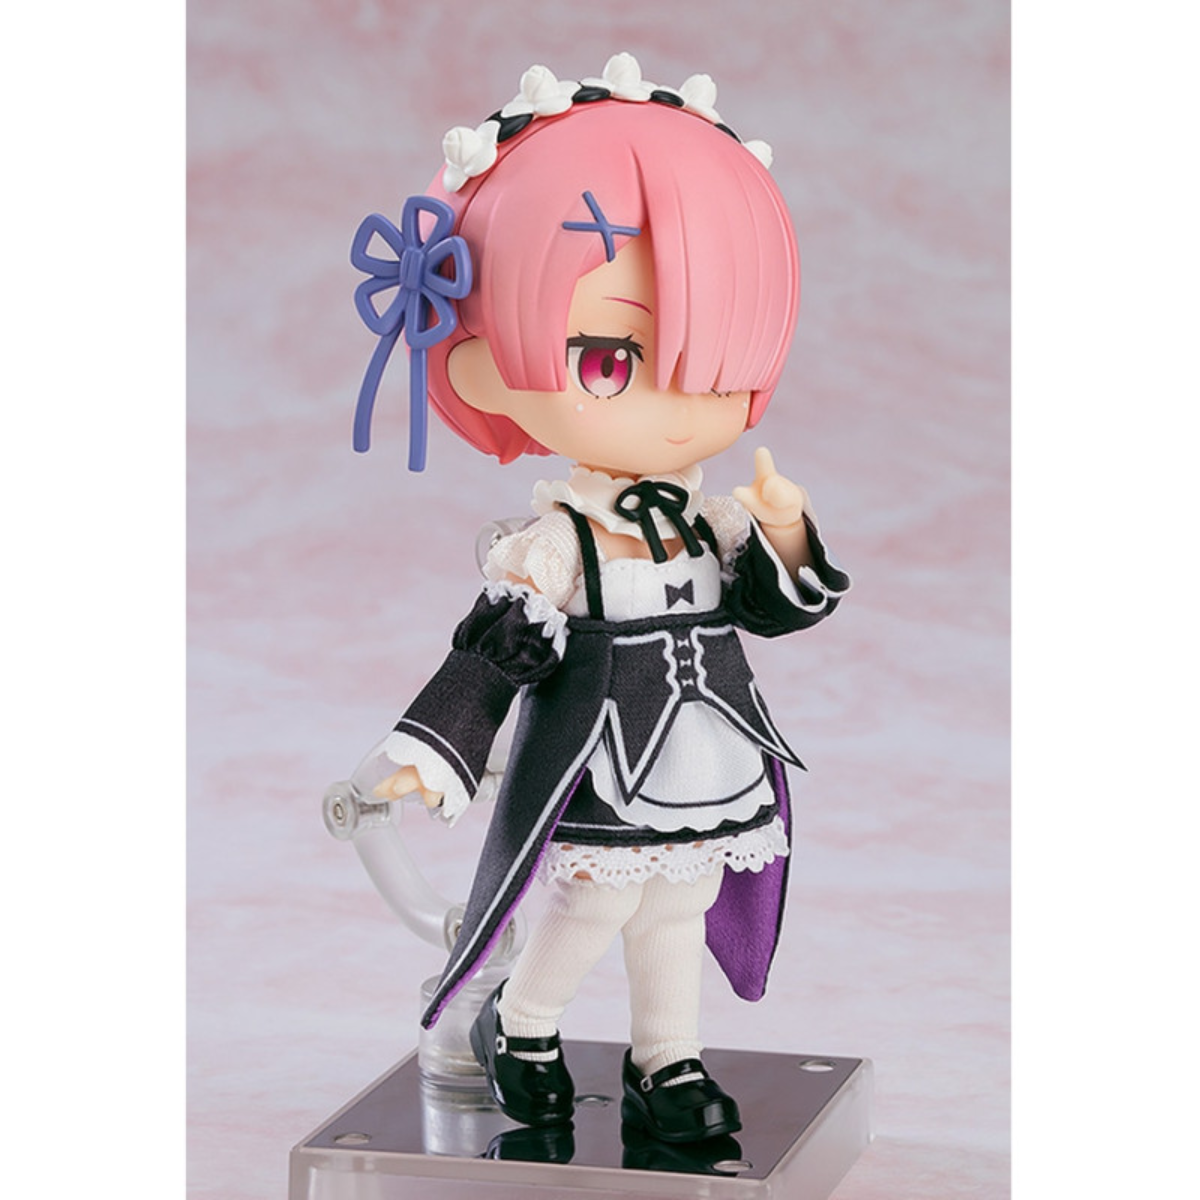 Re:Zero - Starting Life In Another World Nendoroid Doll &quot;Ram&quot;-Good Smile Company-Ace Cards &amp; Collectibles